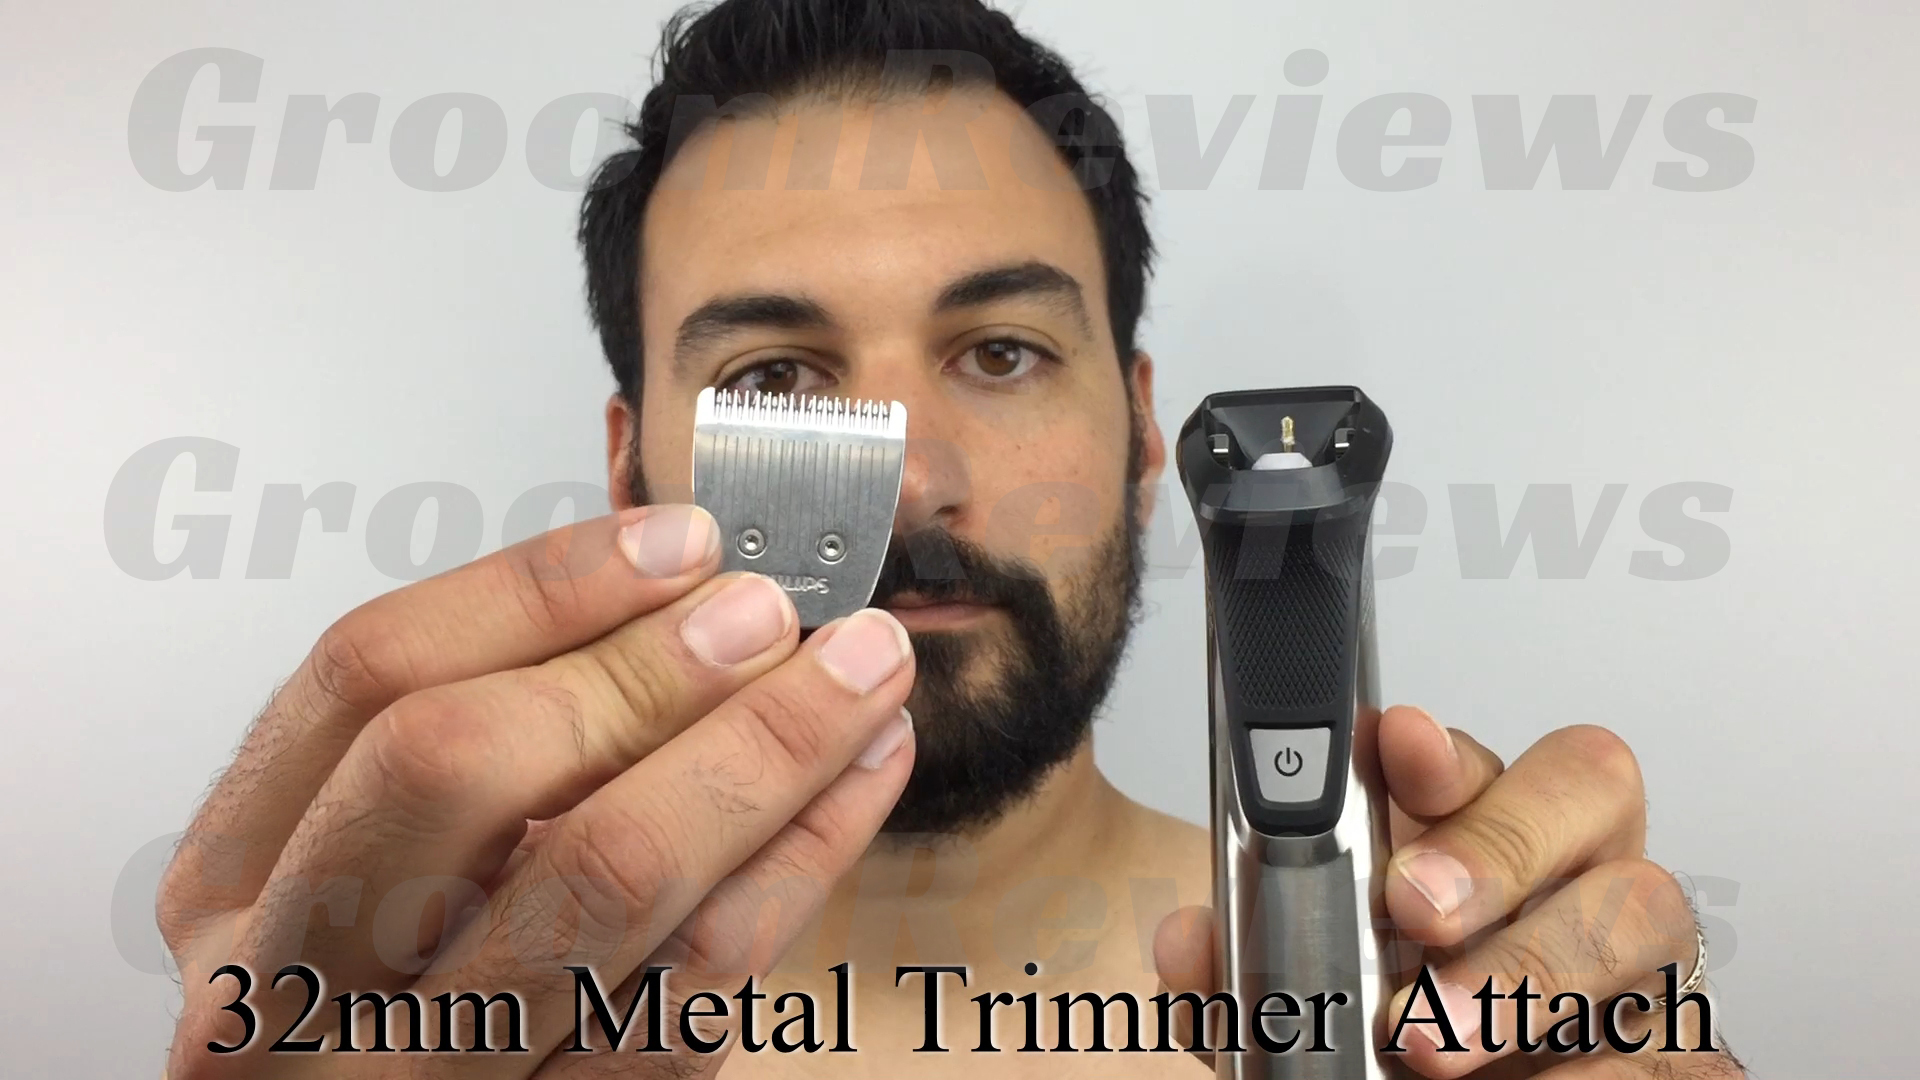 philips 7750 trimmer